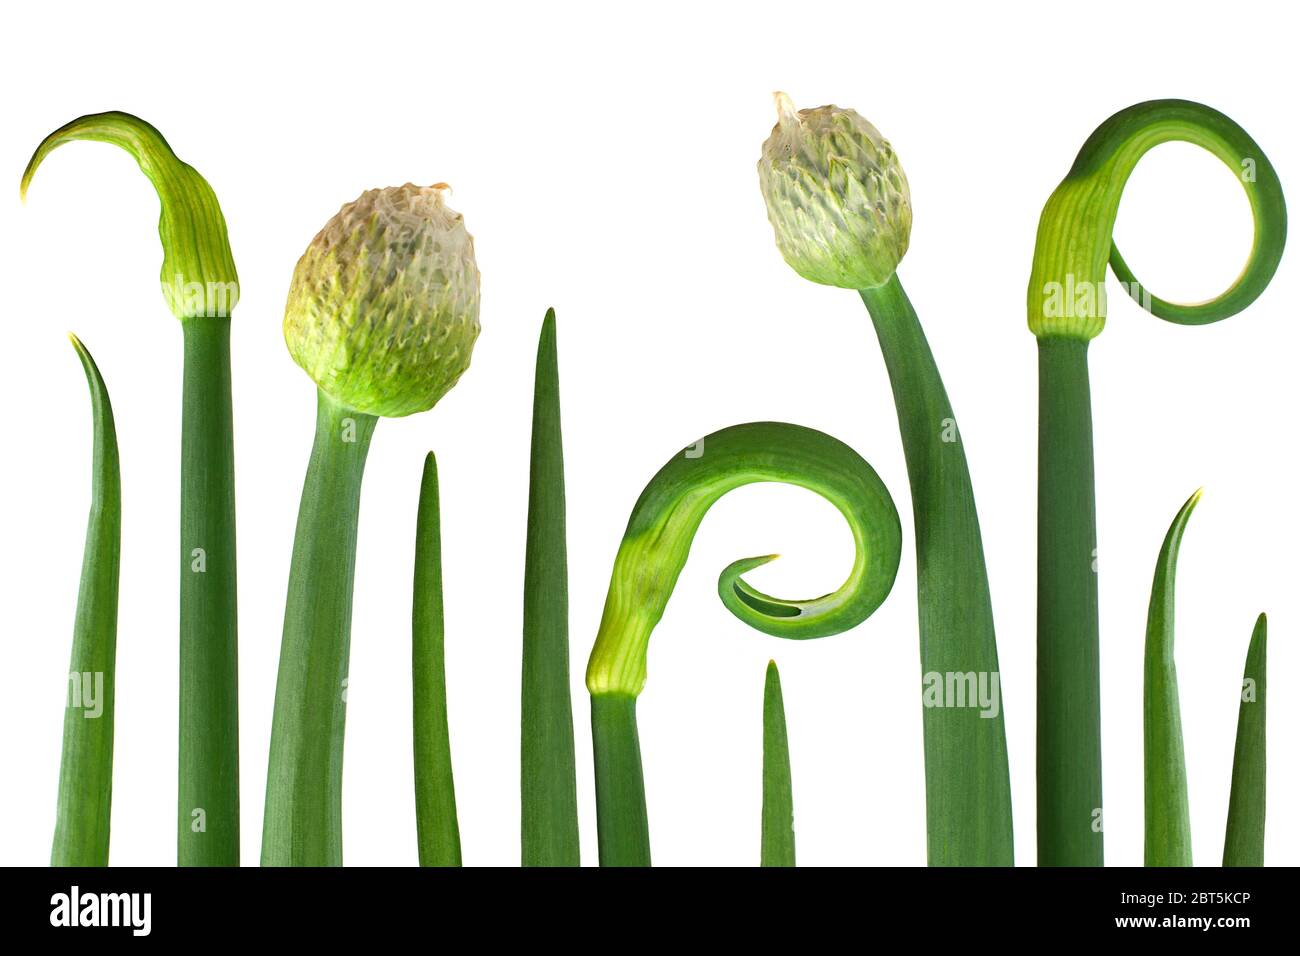 Young onion blossom isolated on white background Stock Photo